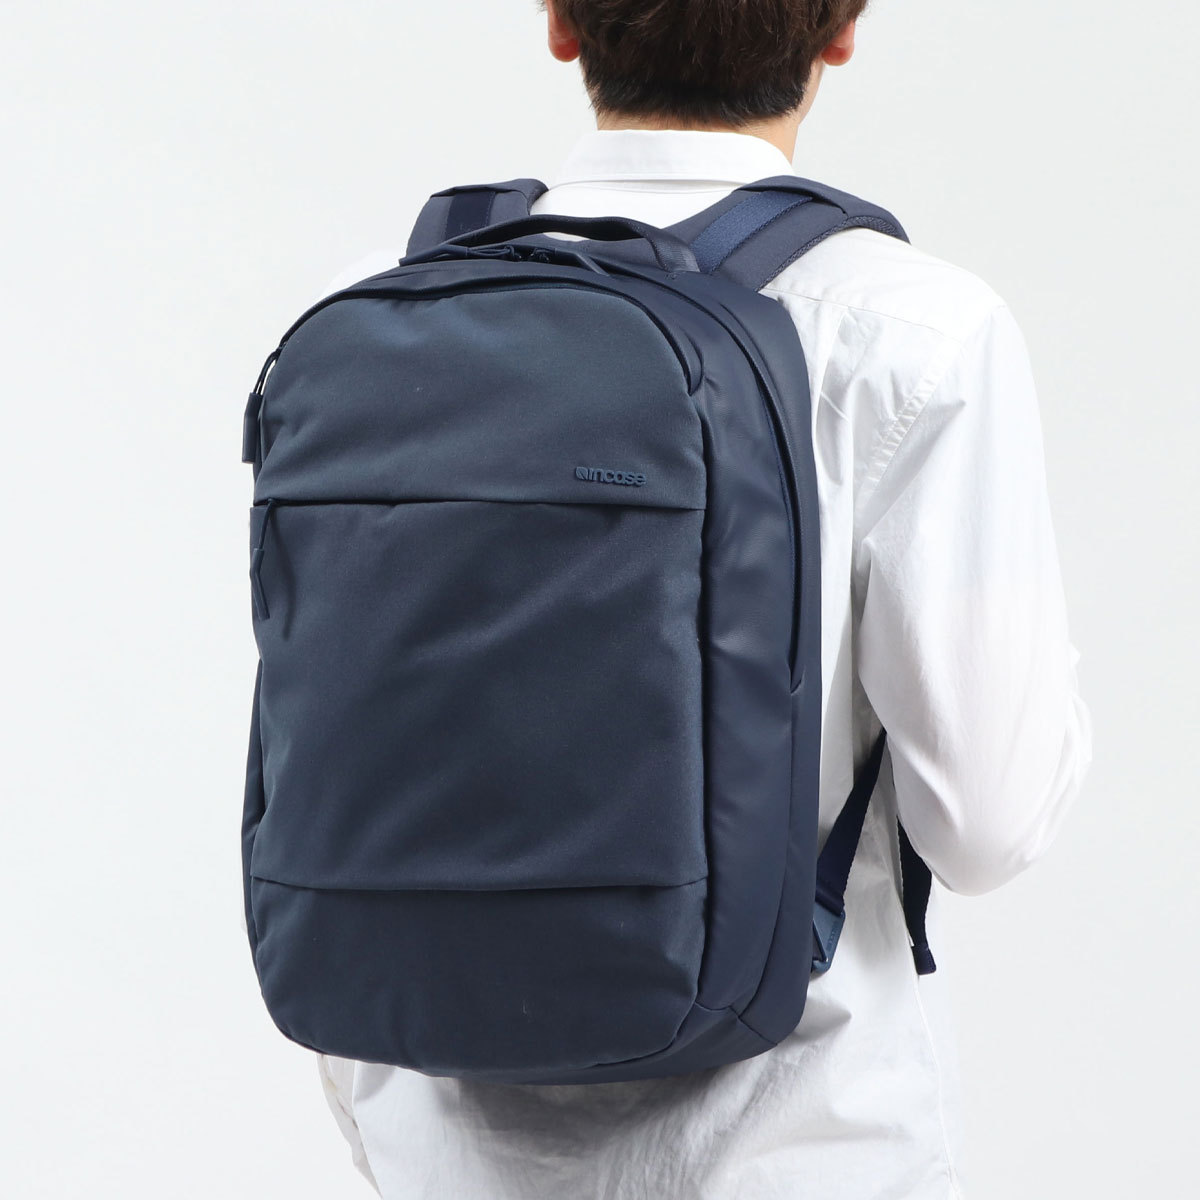 Incase city compact backpack